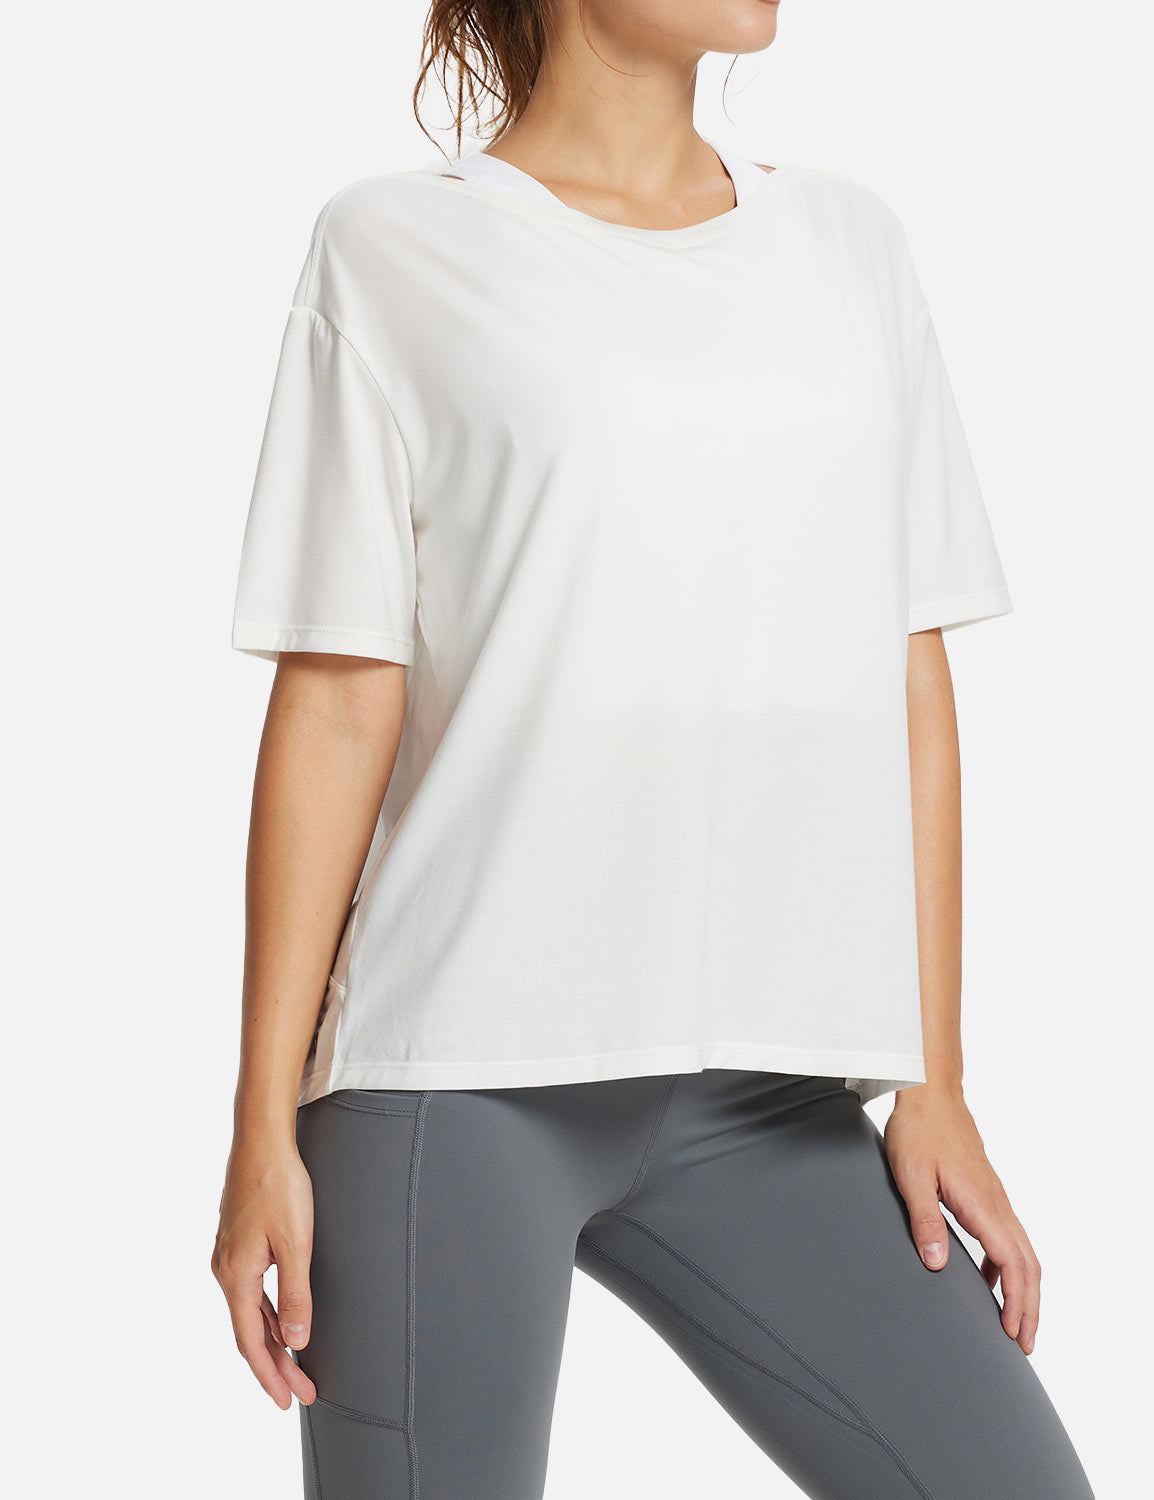 Baleaf Women's Summer Stylish Boatneck Slouch Fit Tee Lucent White Details